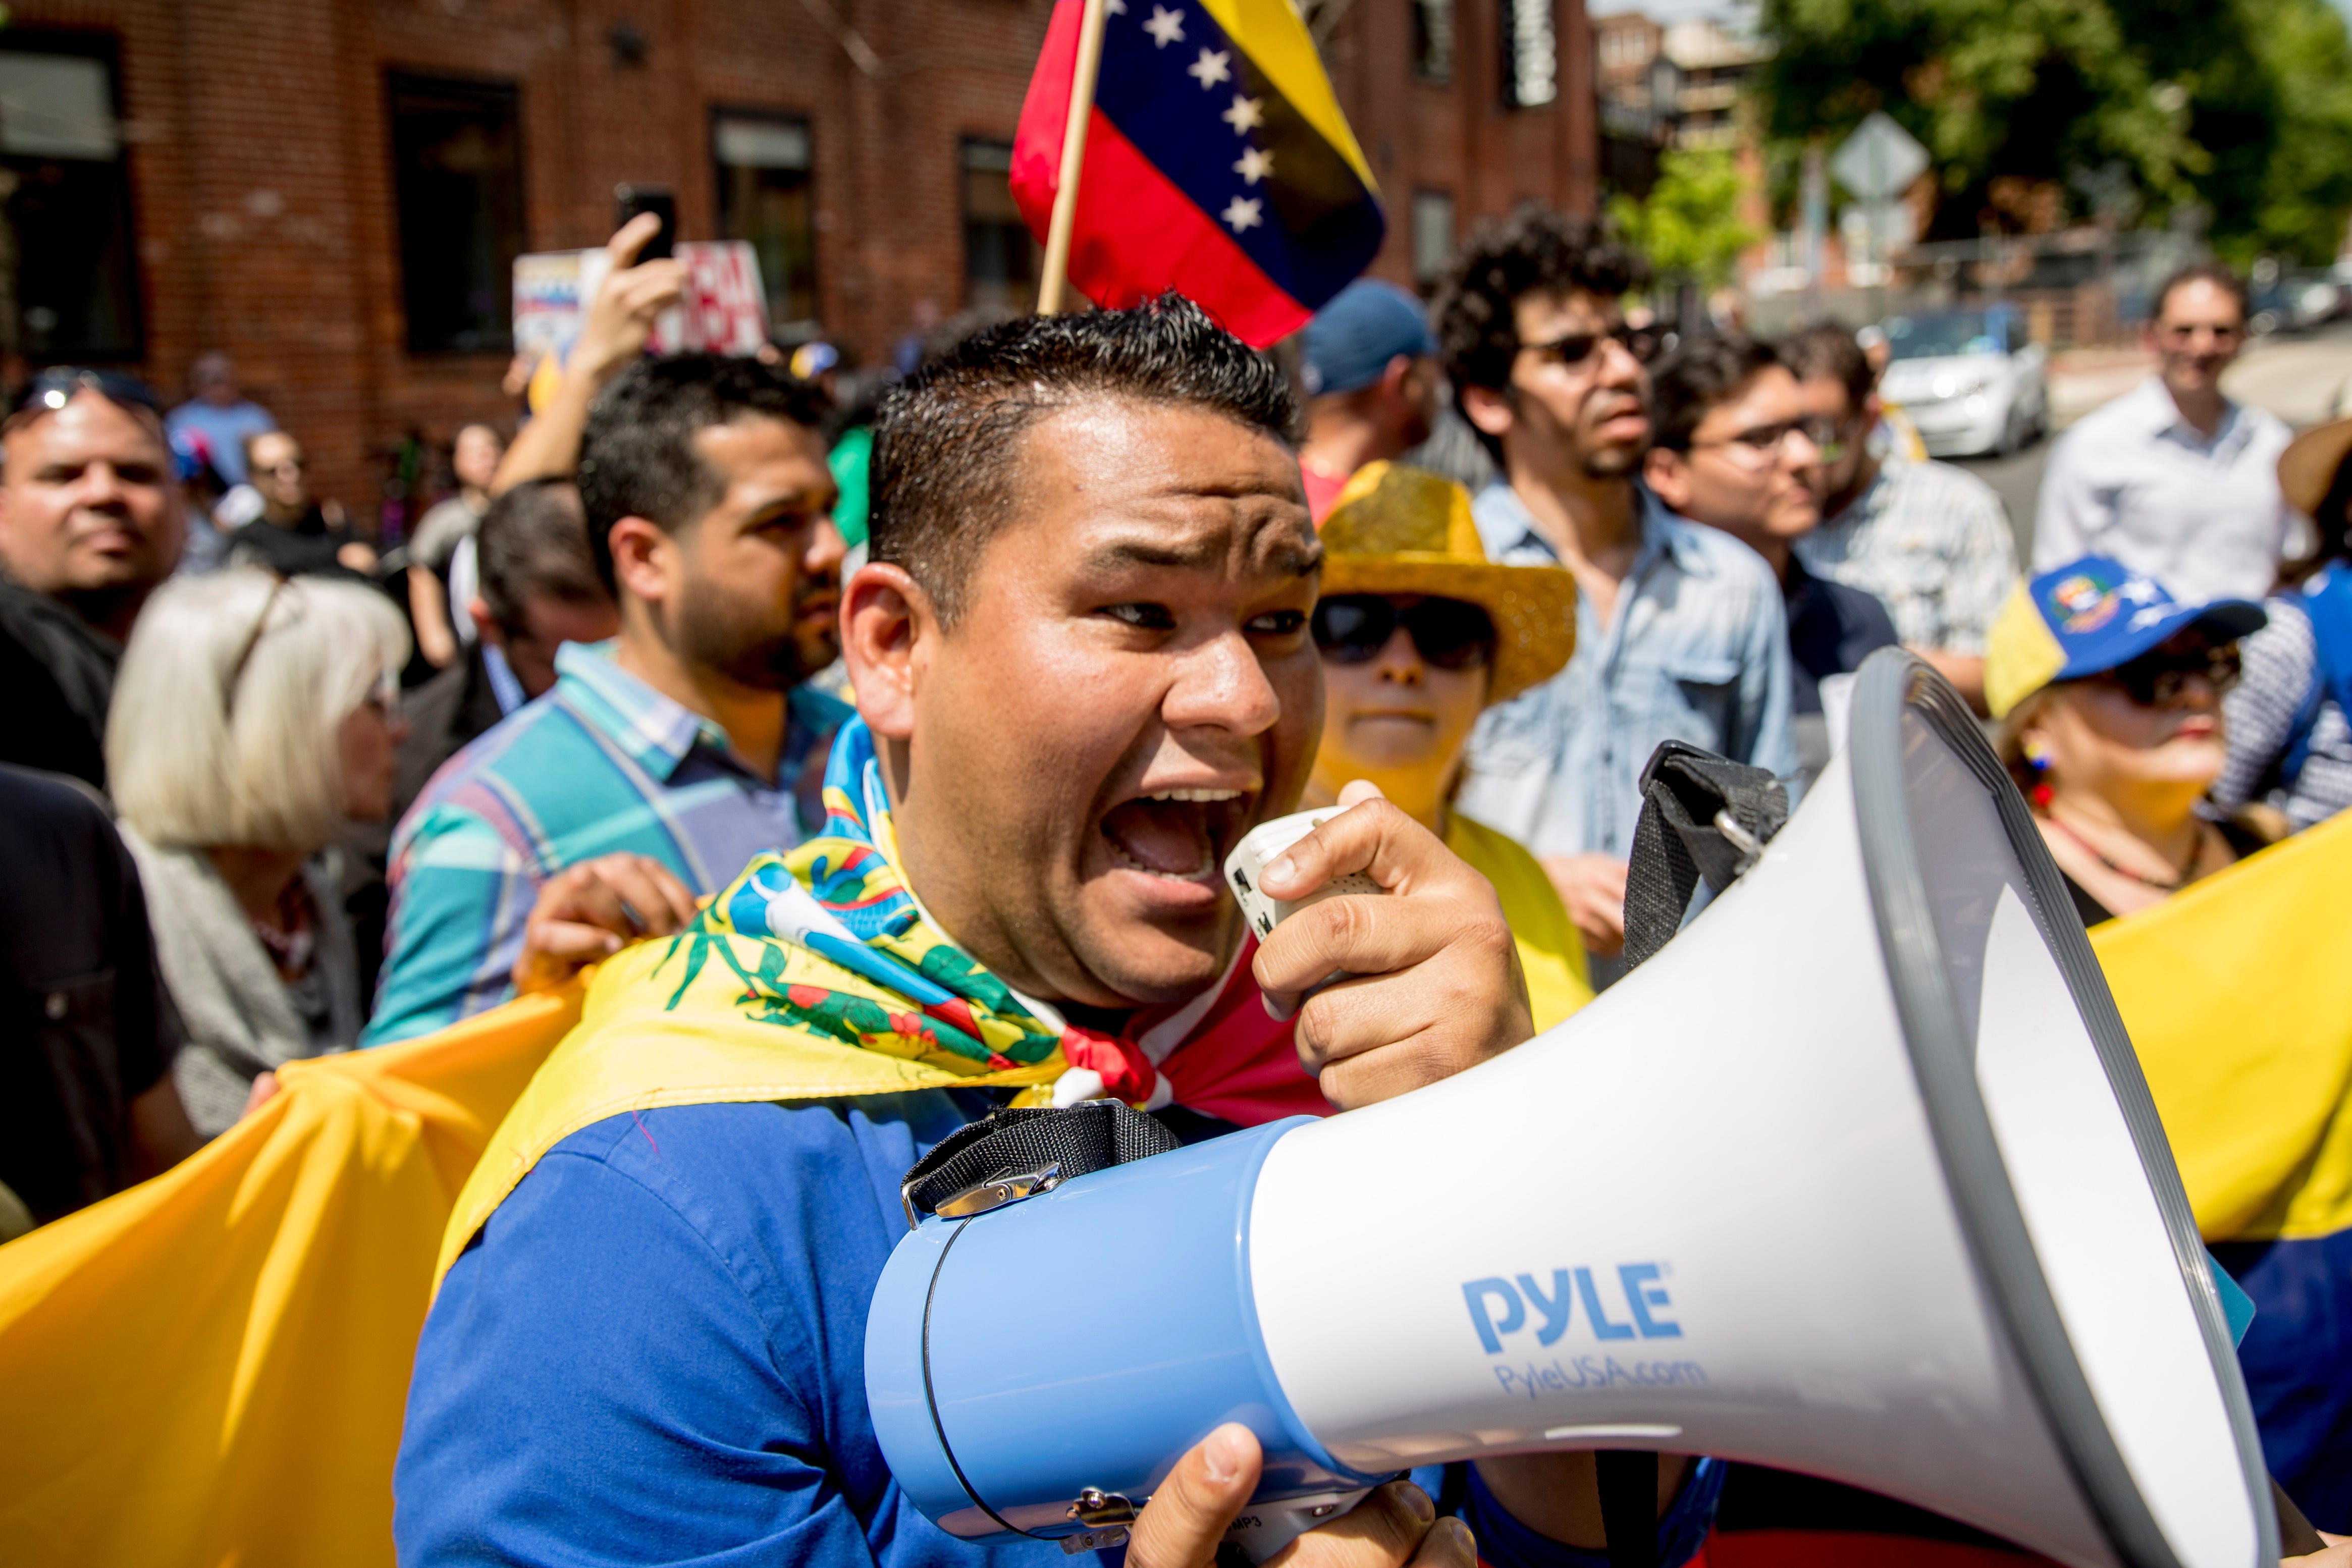 Pro interim government opposition leader Juan Guaido supporters yell chats towards pro Nicolas Maduro supporters outside of the Venezuelan Embassy in Washington, April 30, 2019.